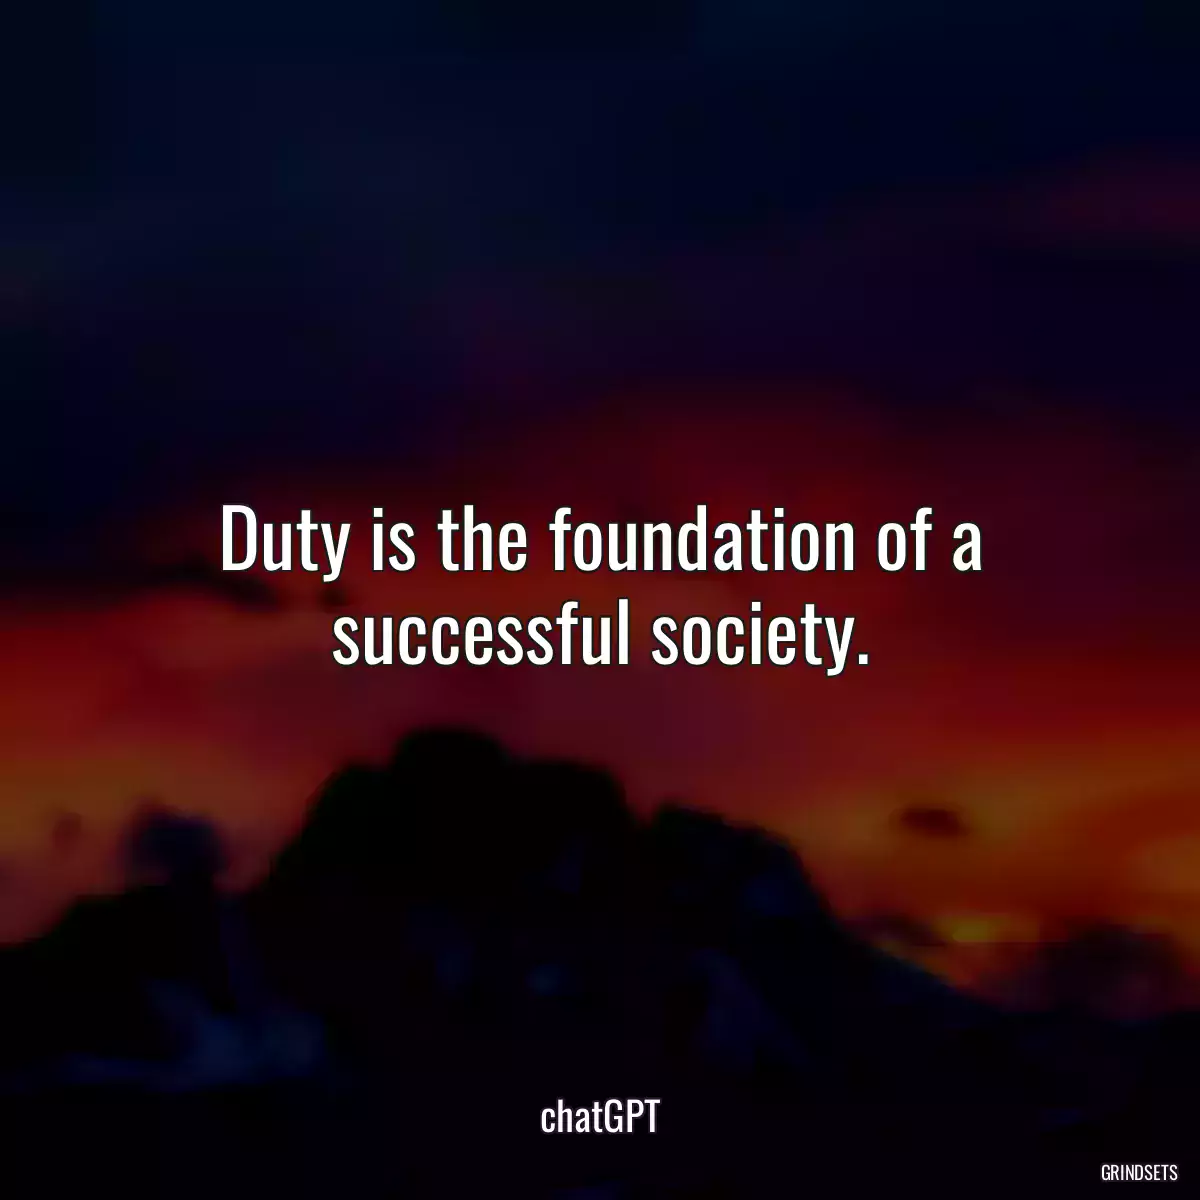 Duty is the foundation of a successful society.